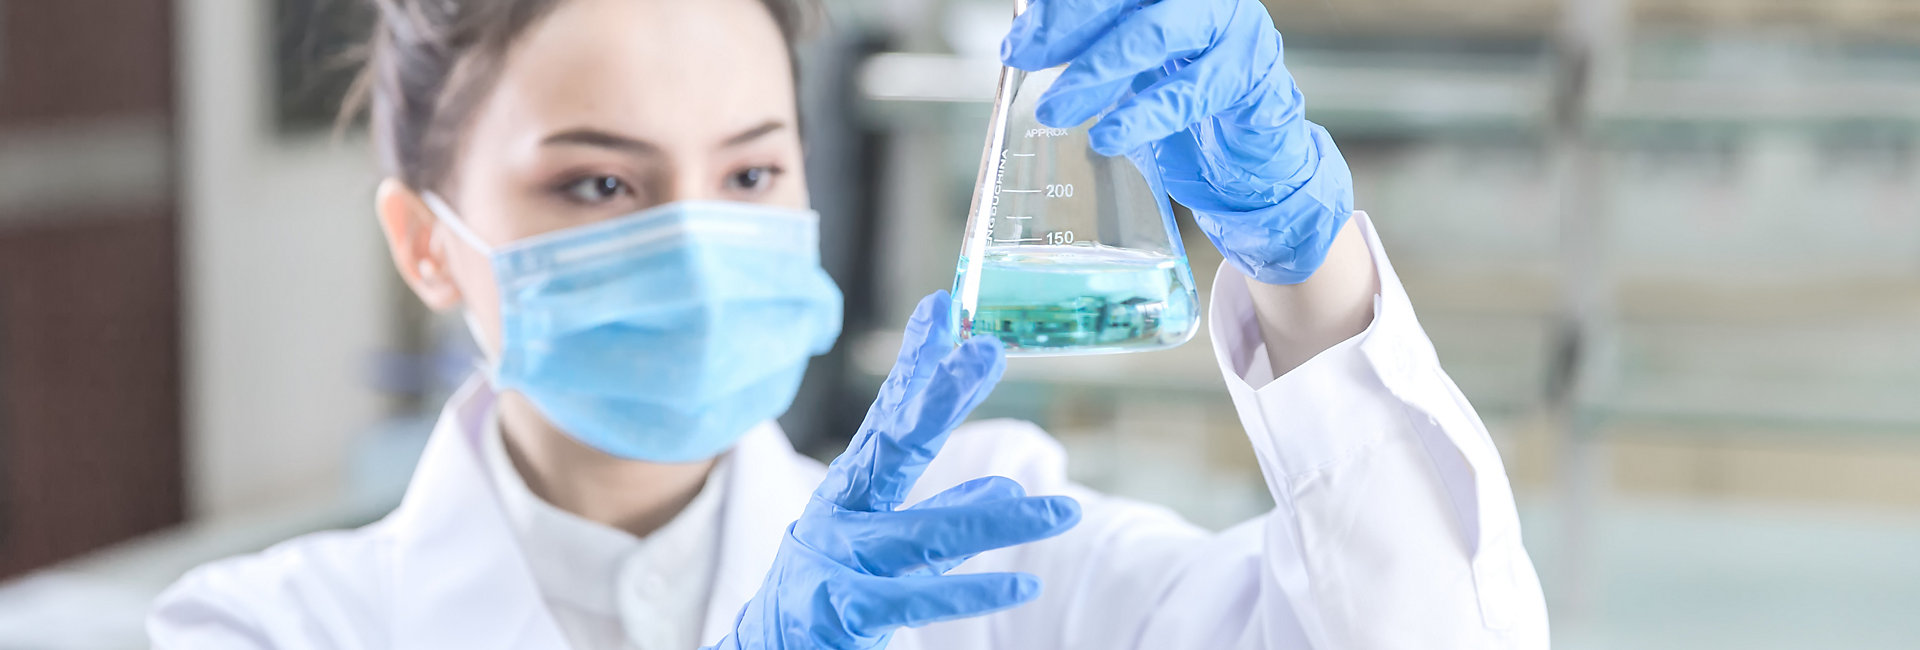 Female scientist looking at the scientific sample in the laboratory; Shutterstock ID 1027796005; purchase_order: -; job: -; client: -